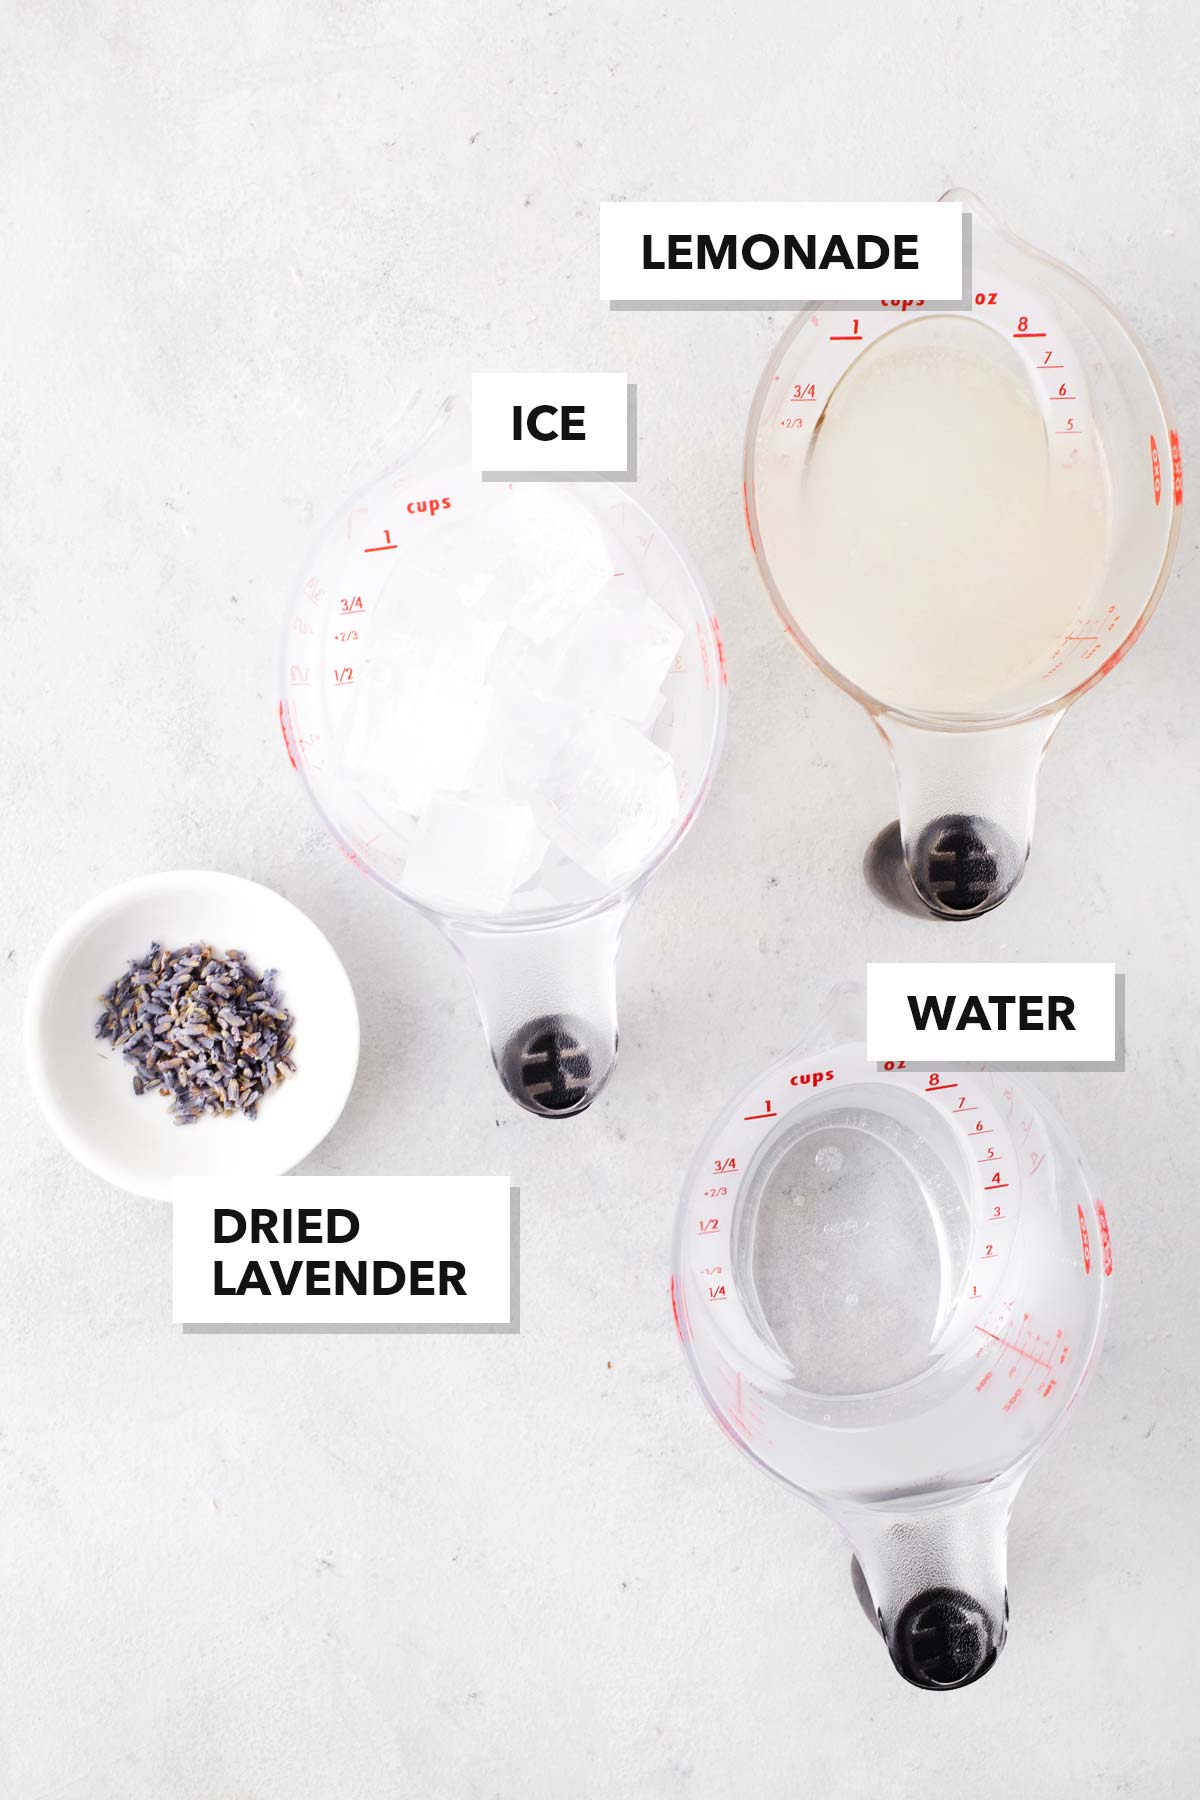 Lavender Lemonade ingredients measured out in bowls and cups.